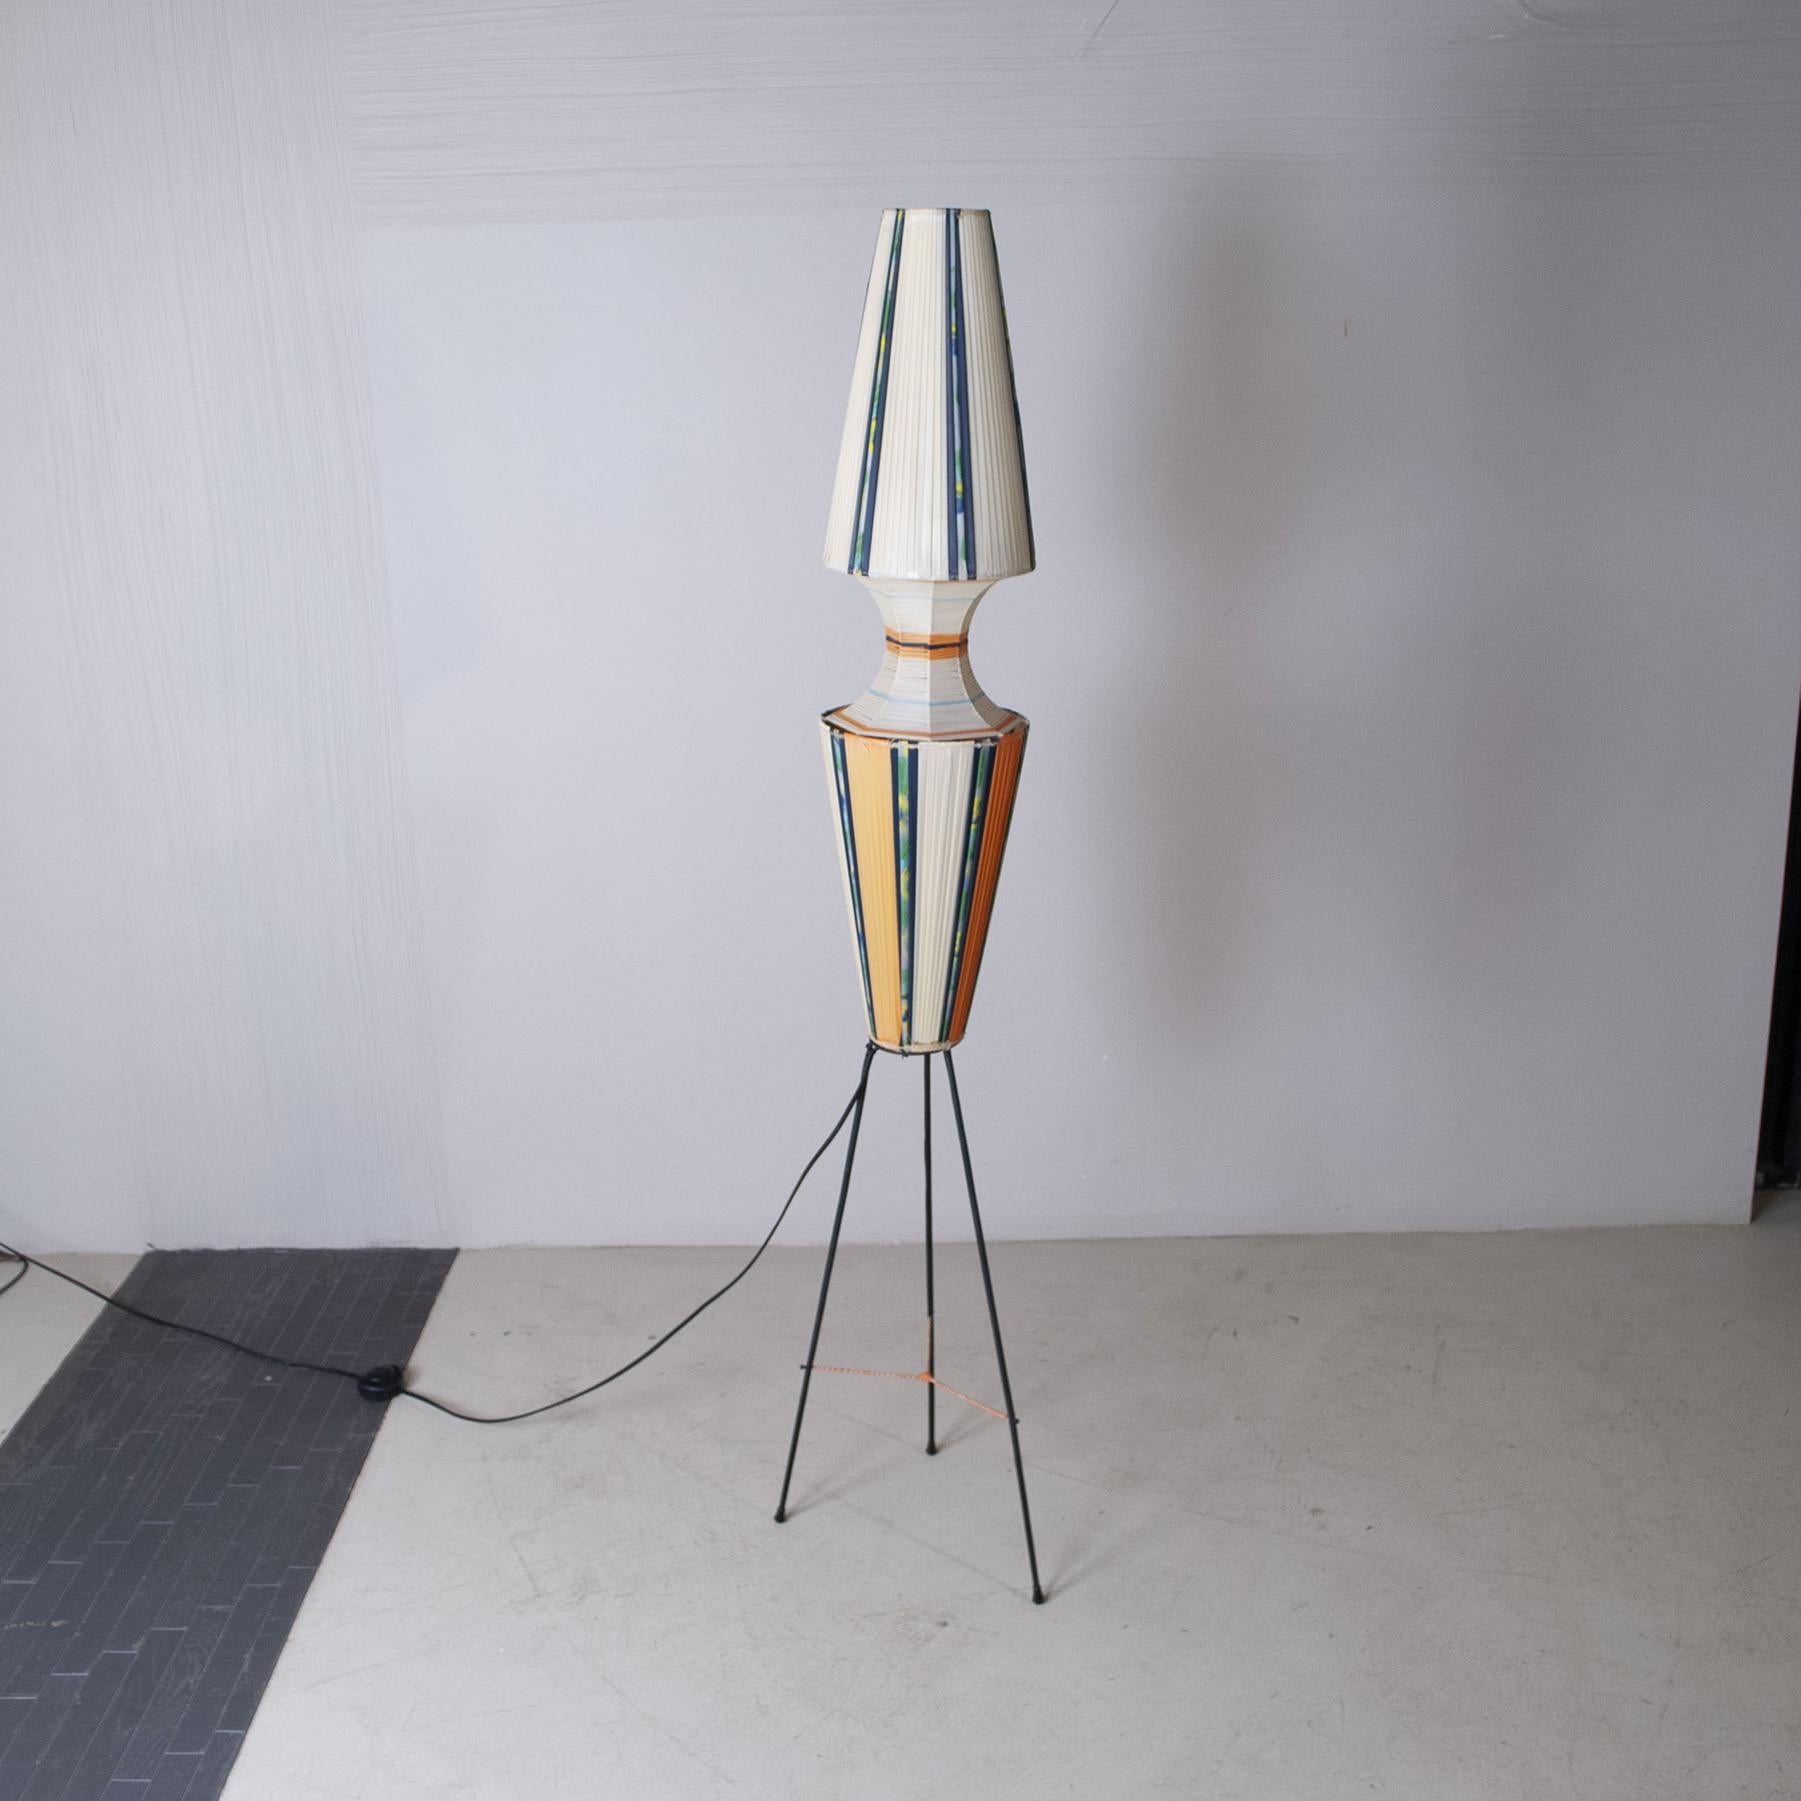 Typical floor lamp produced in Italy late 1950s black lacquered metal structure illuminating part in plastic fabric of various colors typical of the time.